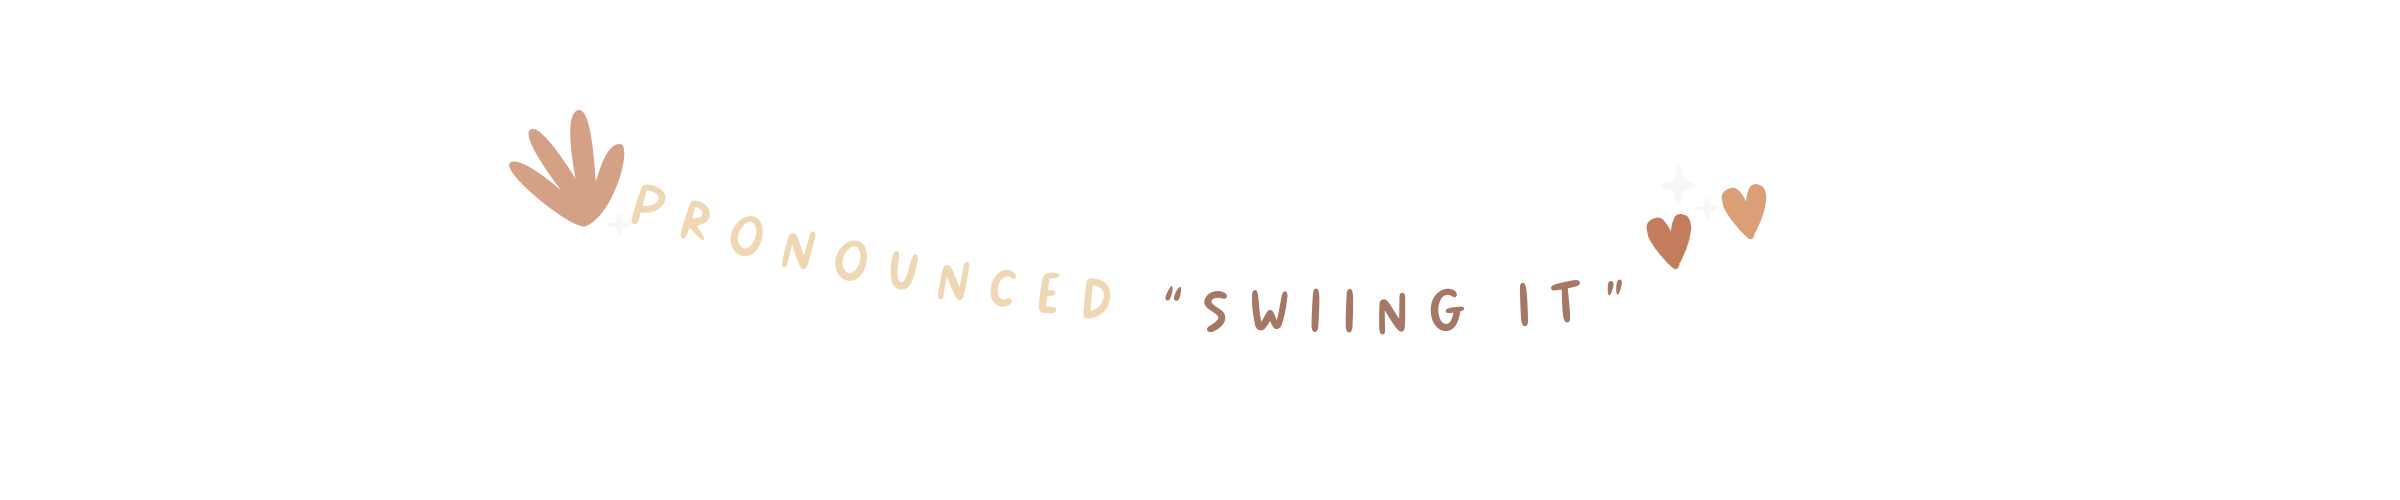 SwungIt_TherapySwing